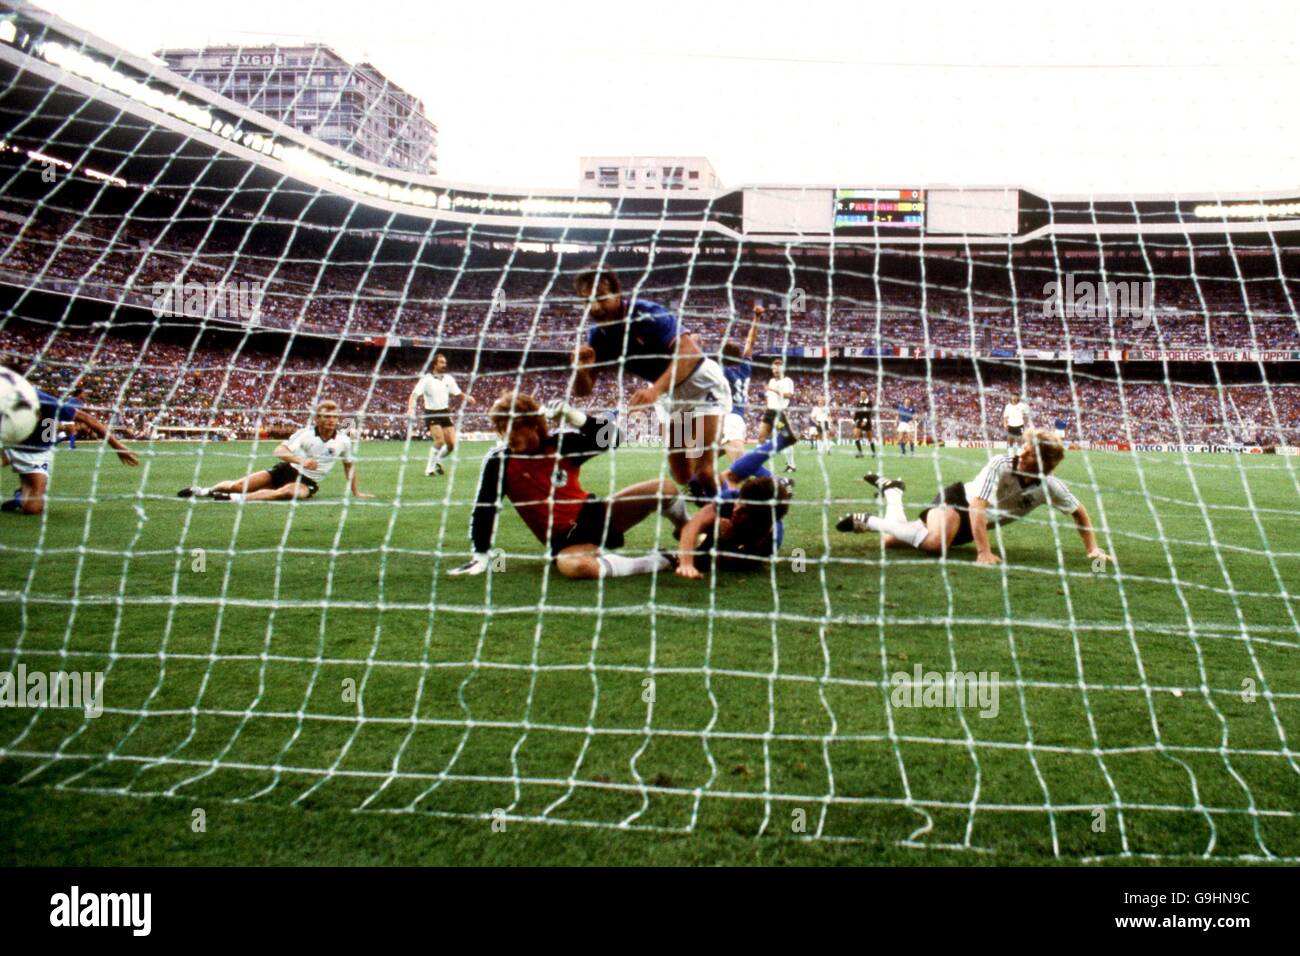 Soccer - World Cup 1982 - final - Italy v West Germany. Italy's Paolo Rossi scores a goal Stock Photo